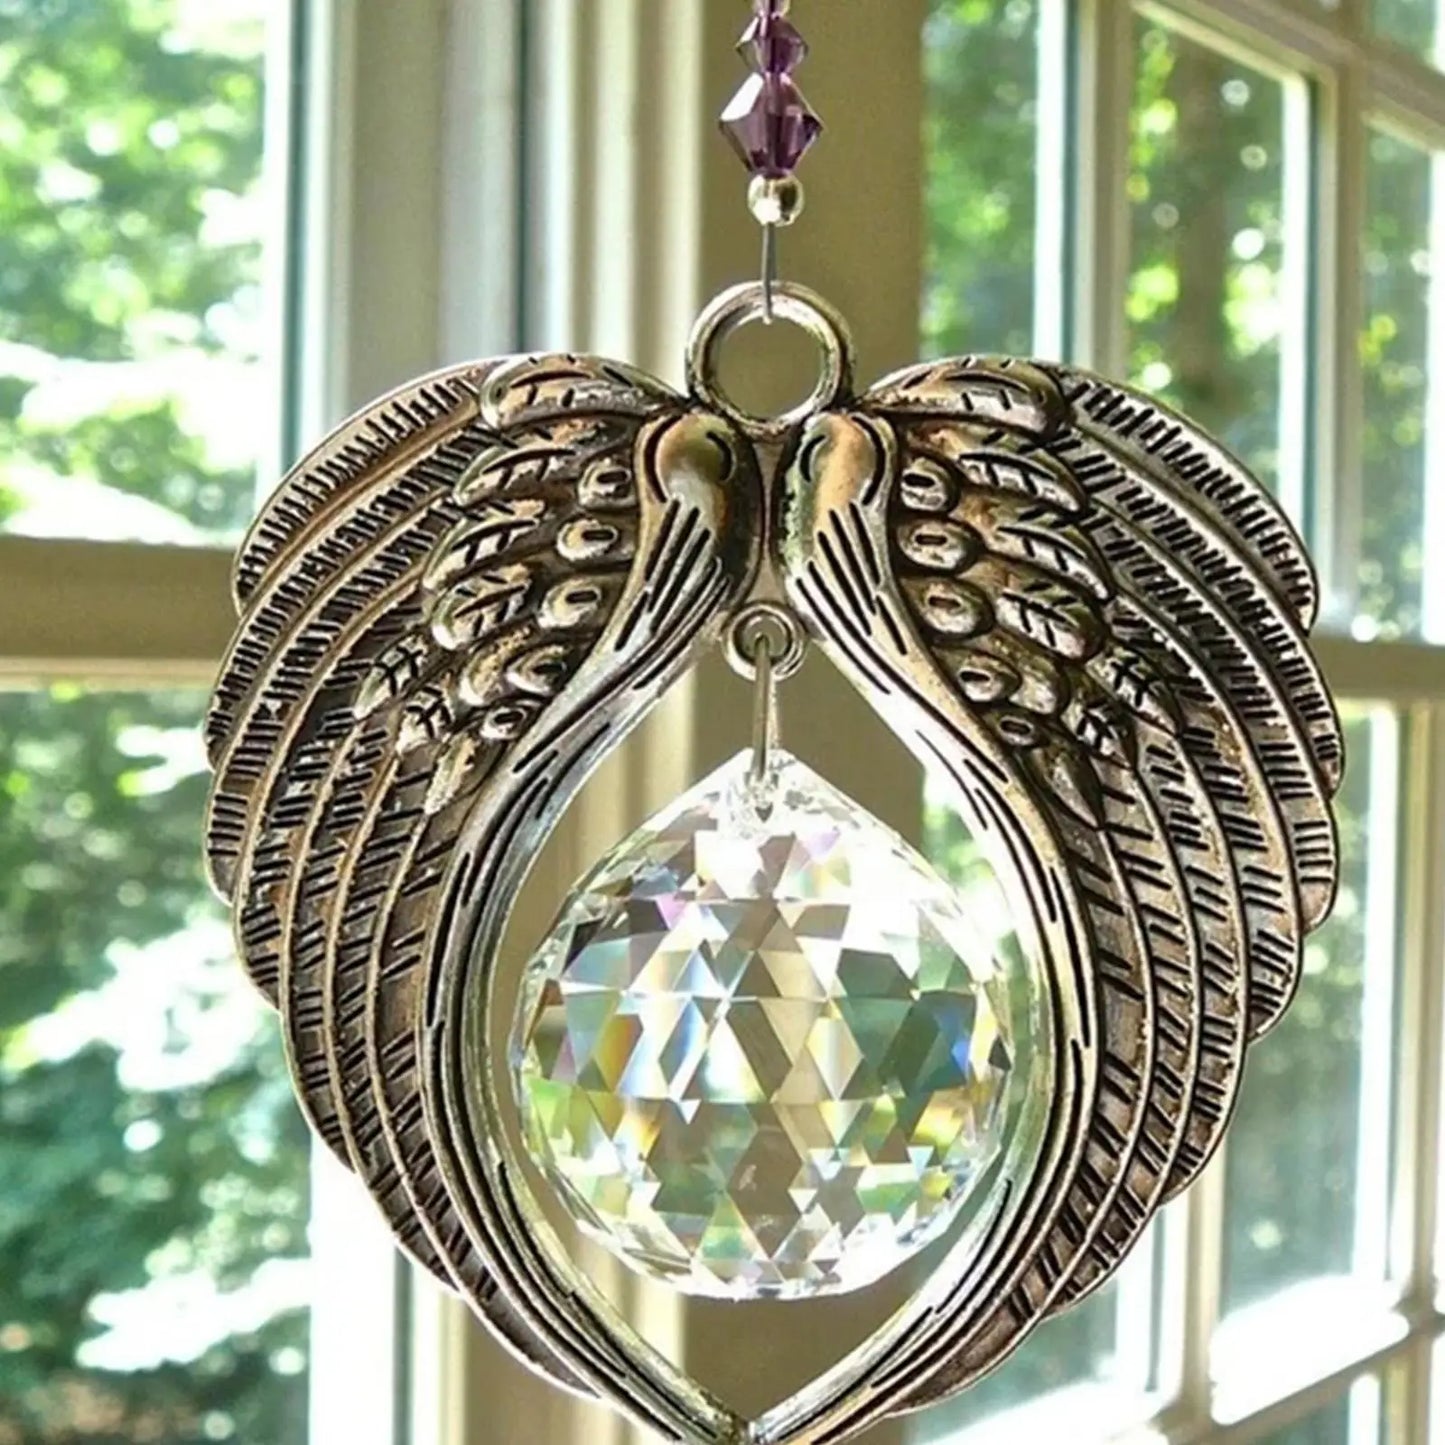 Hanging Angel Wing Suncatcher with Crystal Prism Pendant